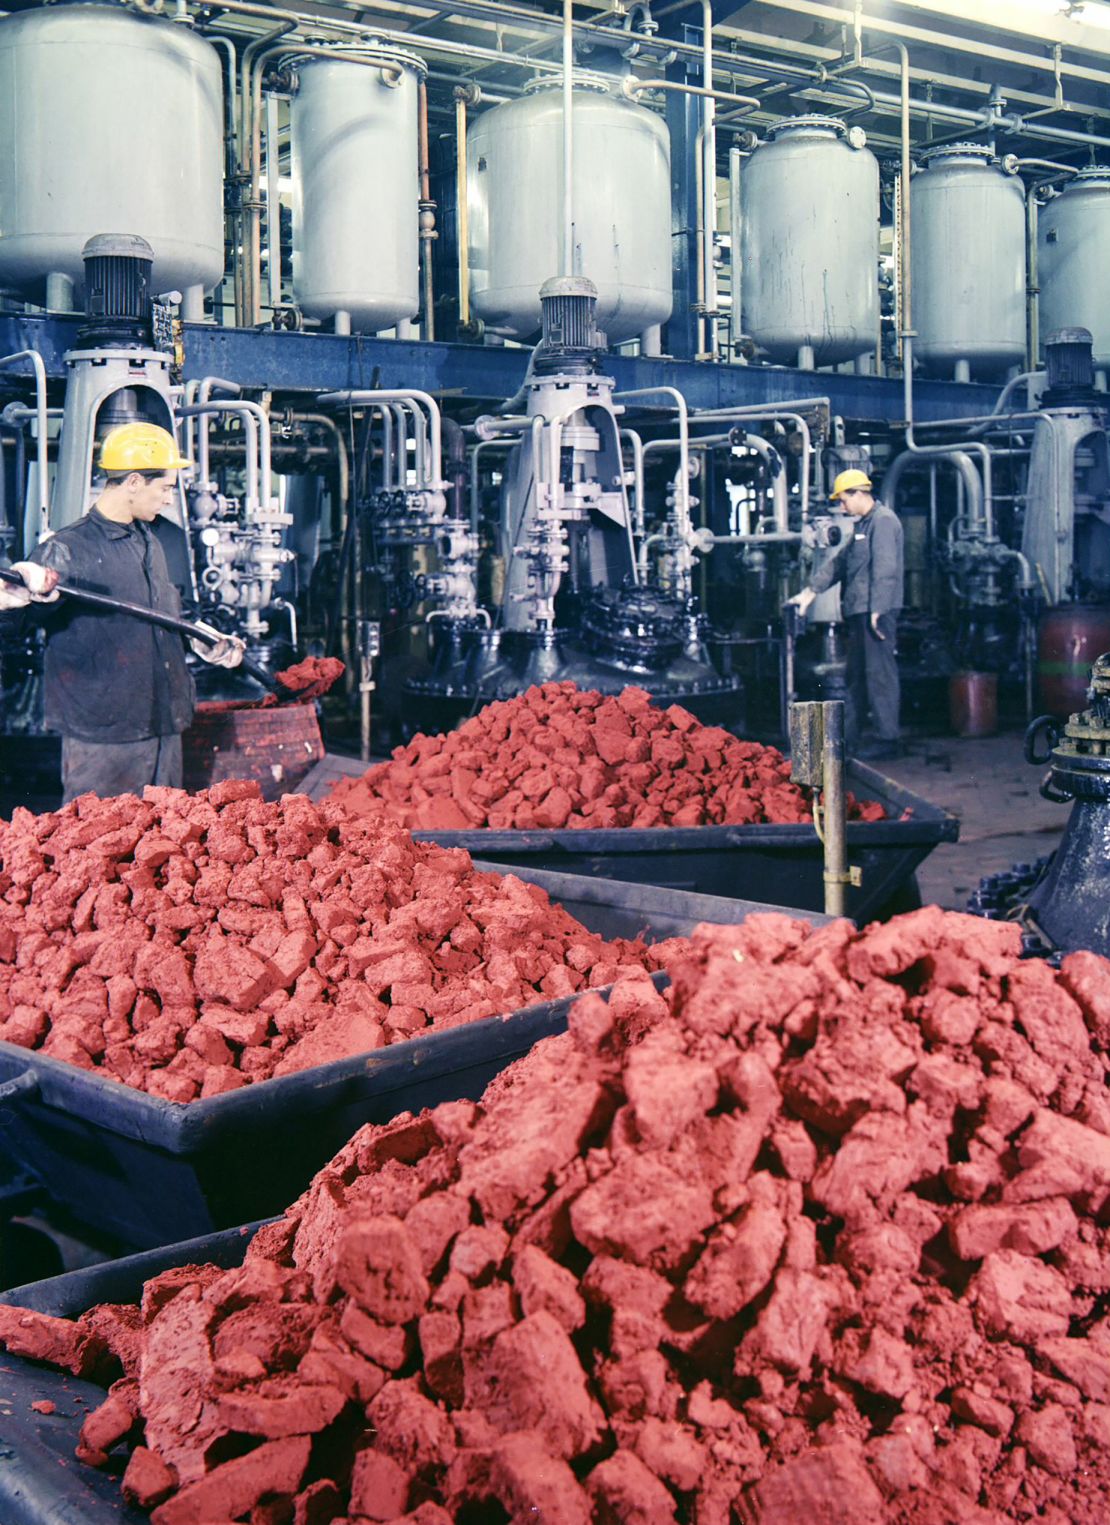 The Alizarin dye process at the Bayer Leverkusen plant in 1961.